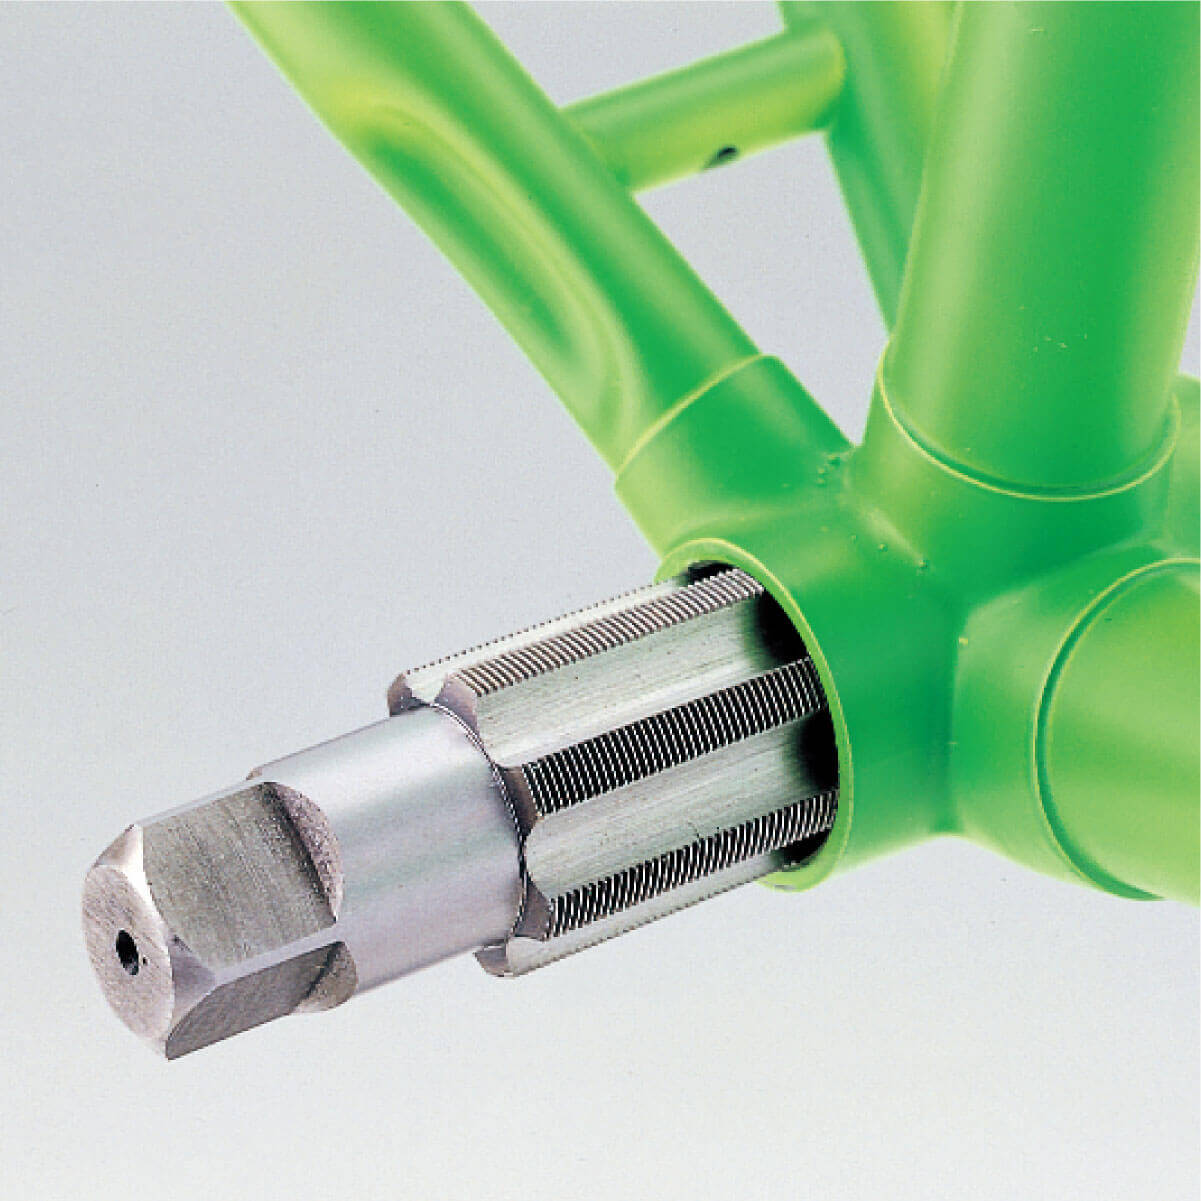 HOZAN C-402 Bottom Bracket Tap Great Tool Left and Right 1 Set Japan S1359 for sale online 